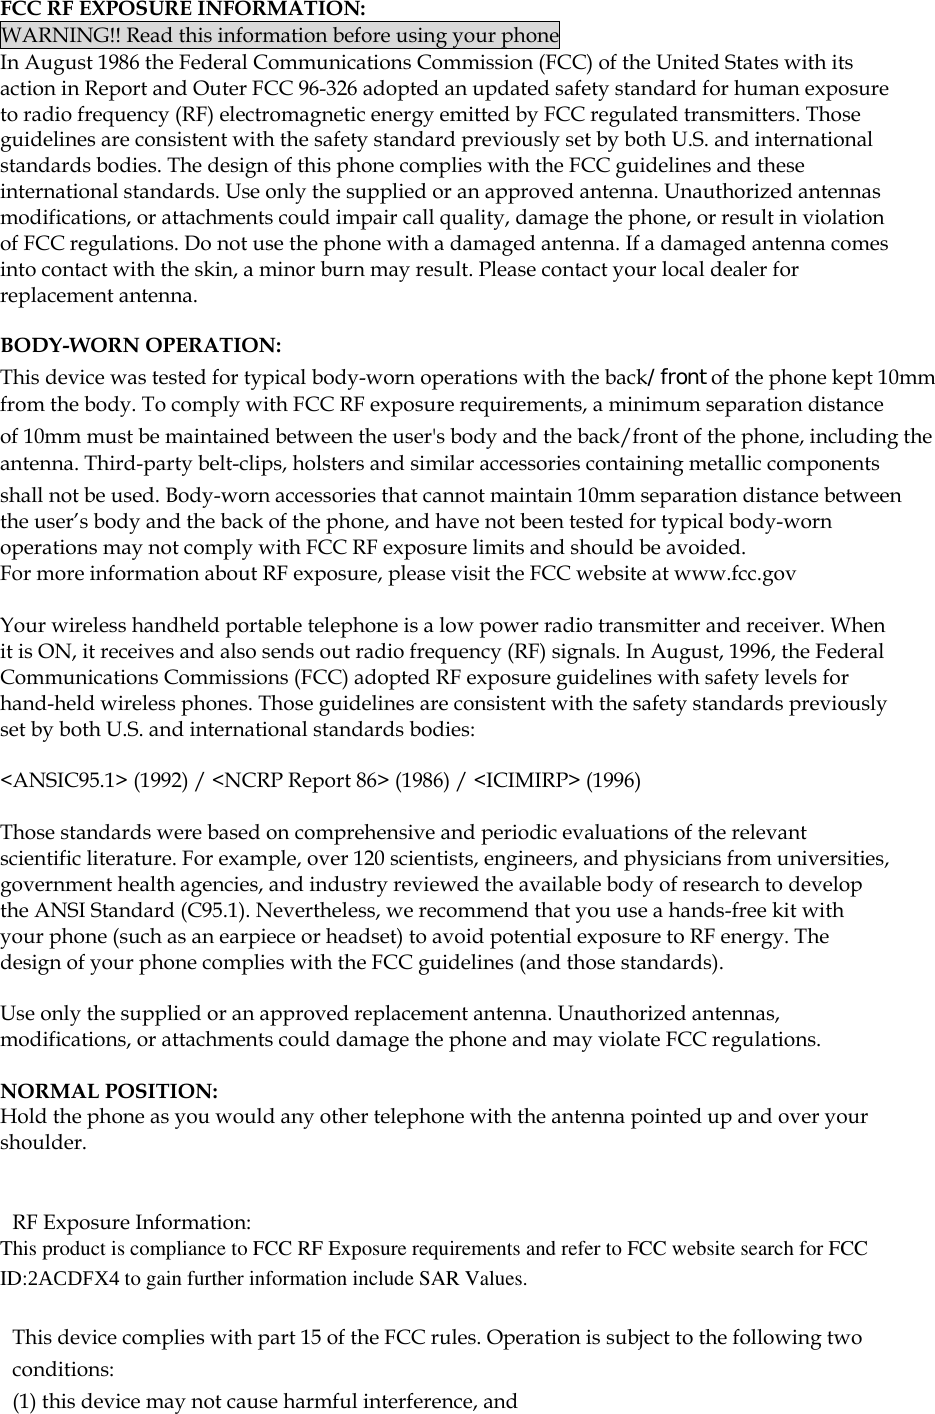  FCC RF EXPOSURE INFORMATION: WARNING!! Read this information before using your phone In August 1986 the Federal Communications Commission (FCC) of the United States with its action in Report and Outer FCC 96-326 adopted an updated safety standard for human exposure to radio frequency (RF) electromagnetic energy emitted by FCC regulated transmitters. Those guidelines are consistent with the safety standard previously set by both U.S. and international standards bodies. The design of this phone complies with the FCC guidelines and these international standards. Use only the supplied or an approved antenna. Unauthorized antennas modifications, or attachments could impair call quality, damage the phone, or result in violation of FCC regulations. Do not use the phone with a damaged antenna. If a damaged antenna comes into contact with the skin, a minor burn may result. Please contact your local dealer for replacement antenna.  BODY-WORN OPERATION: This device was tested for typical body-worn operations with the back/front of the phone kept 10mm from the body. To comply with FCC RF exposure requirements, a minimum separation distance of 10mm must be maintained between the user&apos;s body and the back/front of the phone, including the antenna. Third-party belt-clips, holsters and similar accessories containing metallic components shall not be used. Body-worn accessories that cannot maintain 10mm separation distance between the user’s body and the back of the phone, and have not been tested for typical body-worn operations may not comply with FCC RF exposure limits and should be avoided. For more information about RF exposure, please visit the FCC website at www.fcc.gov  Your wireless handheld portable telephone is a low power radio transmitter and receiver. When it is ON, it receives and also sends out radio frequency (RF) signals. In August, 1996, the Federal Communications Commissions (FCC) adopted RF exposure guidelines with safety levels for hand-held wireless phones. Those guidelines are consistent with the safety standards previously set by both U.S. and international standards bodies:  &lt;ANSIC95.1&gt; (1992) / &lt;NCRP Report 86&gt; (1986) / &lt;ICIMIRP&gt; (1996)  Those standards were based on comprehensive and periodic evaluations of the relevant scientific literature. For example, over 120 scientists, engineers, and physicians from universities, government health agencies, and industry reviewed the available body of research to develop the ANSI Standard (C95.1). Nevertheless, we recommend that you use a hands-free kit with your phone (such as an earpiece or headset) to avoid potential exposure to RF energy. The design of your phone complies with the FCC guidelines (and those standards).  Use only the supplied or an approved replacement antenna. Unauthorized antennas, modifications, or attachments could damage the phone and may violate FCC regulations.   NORMAL POSITION:  Hold the phone as you would any other telephone with the antenna pointed up and over your shoulder.   RF Exposure Information: This product is compliance to FCC RF Exposure requirements and refer to FCC website search for FCC ID:2ACDFX4 to gain further information include SAR Values.    This device complies with part 15 of the FCC rules. Operation is subject to the following two conditions: (1) this device may not cause harmful interference, and 